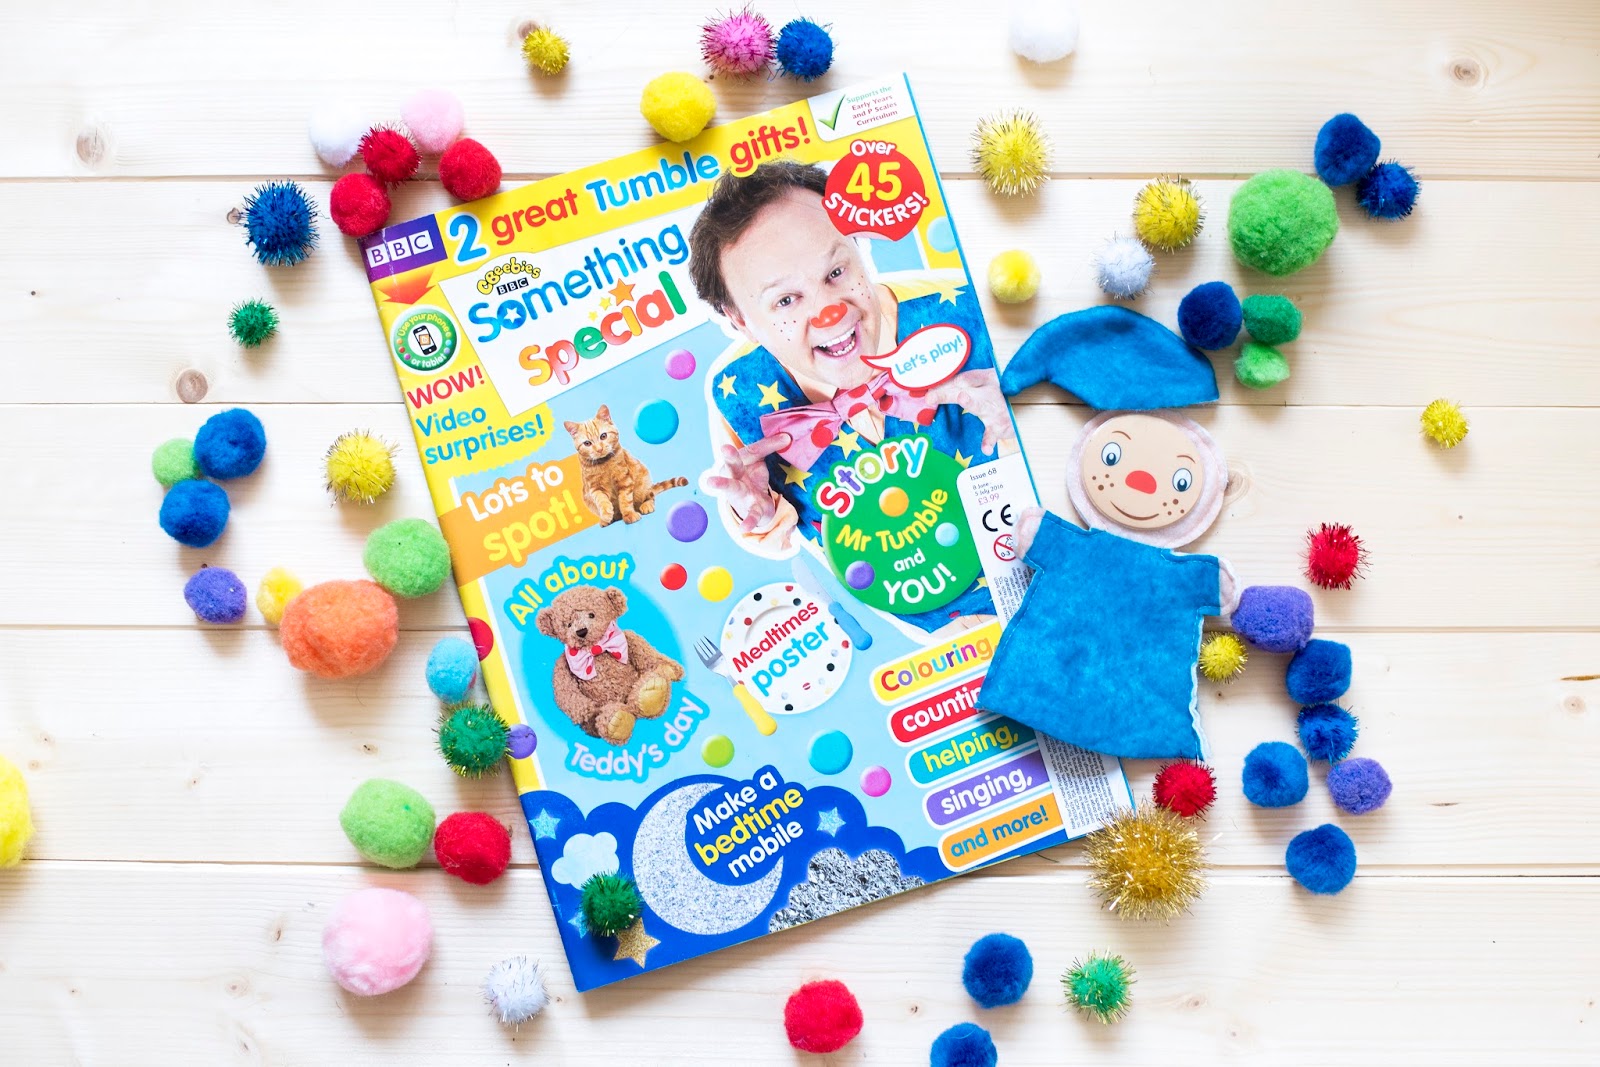 WE’RE ALL FRIENDS: MR. TUMBLE’S SOMETHING SPECIAL INTERACTIVE MAGAZINE